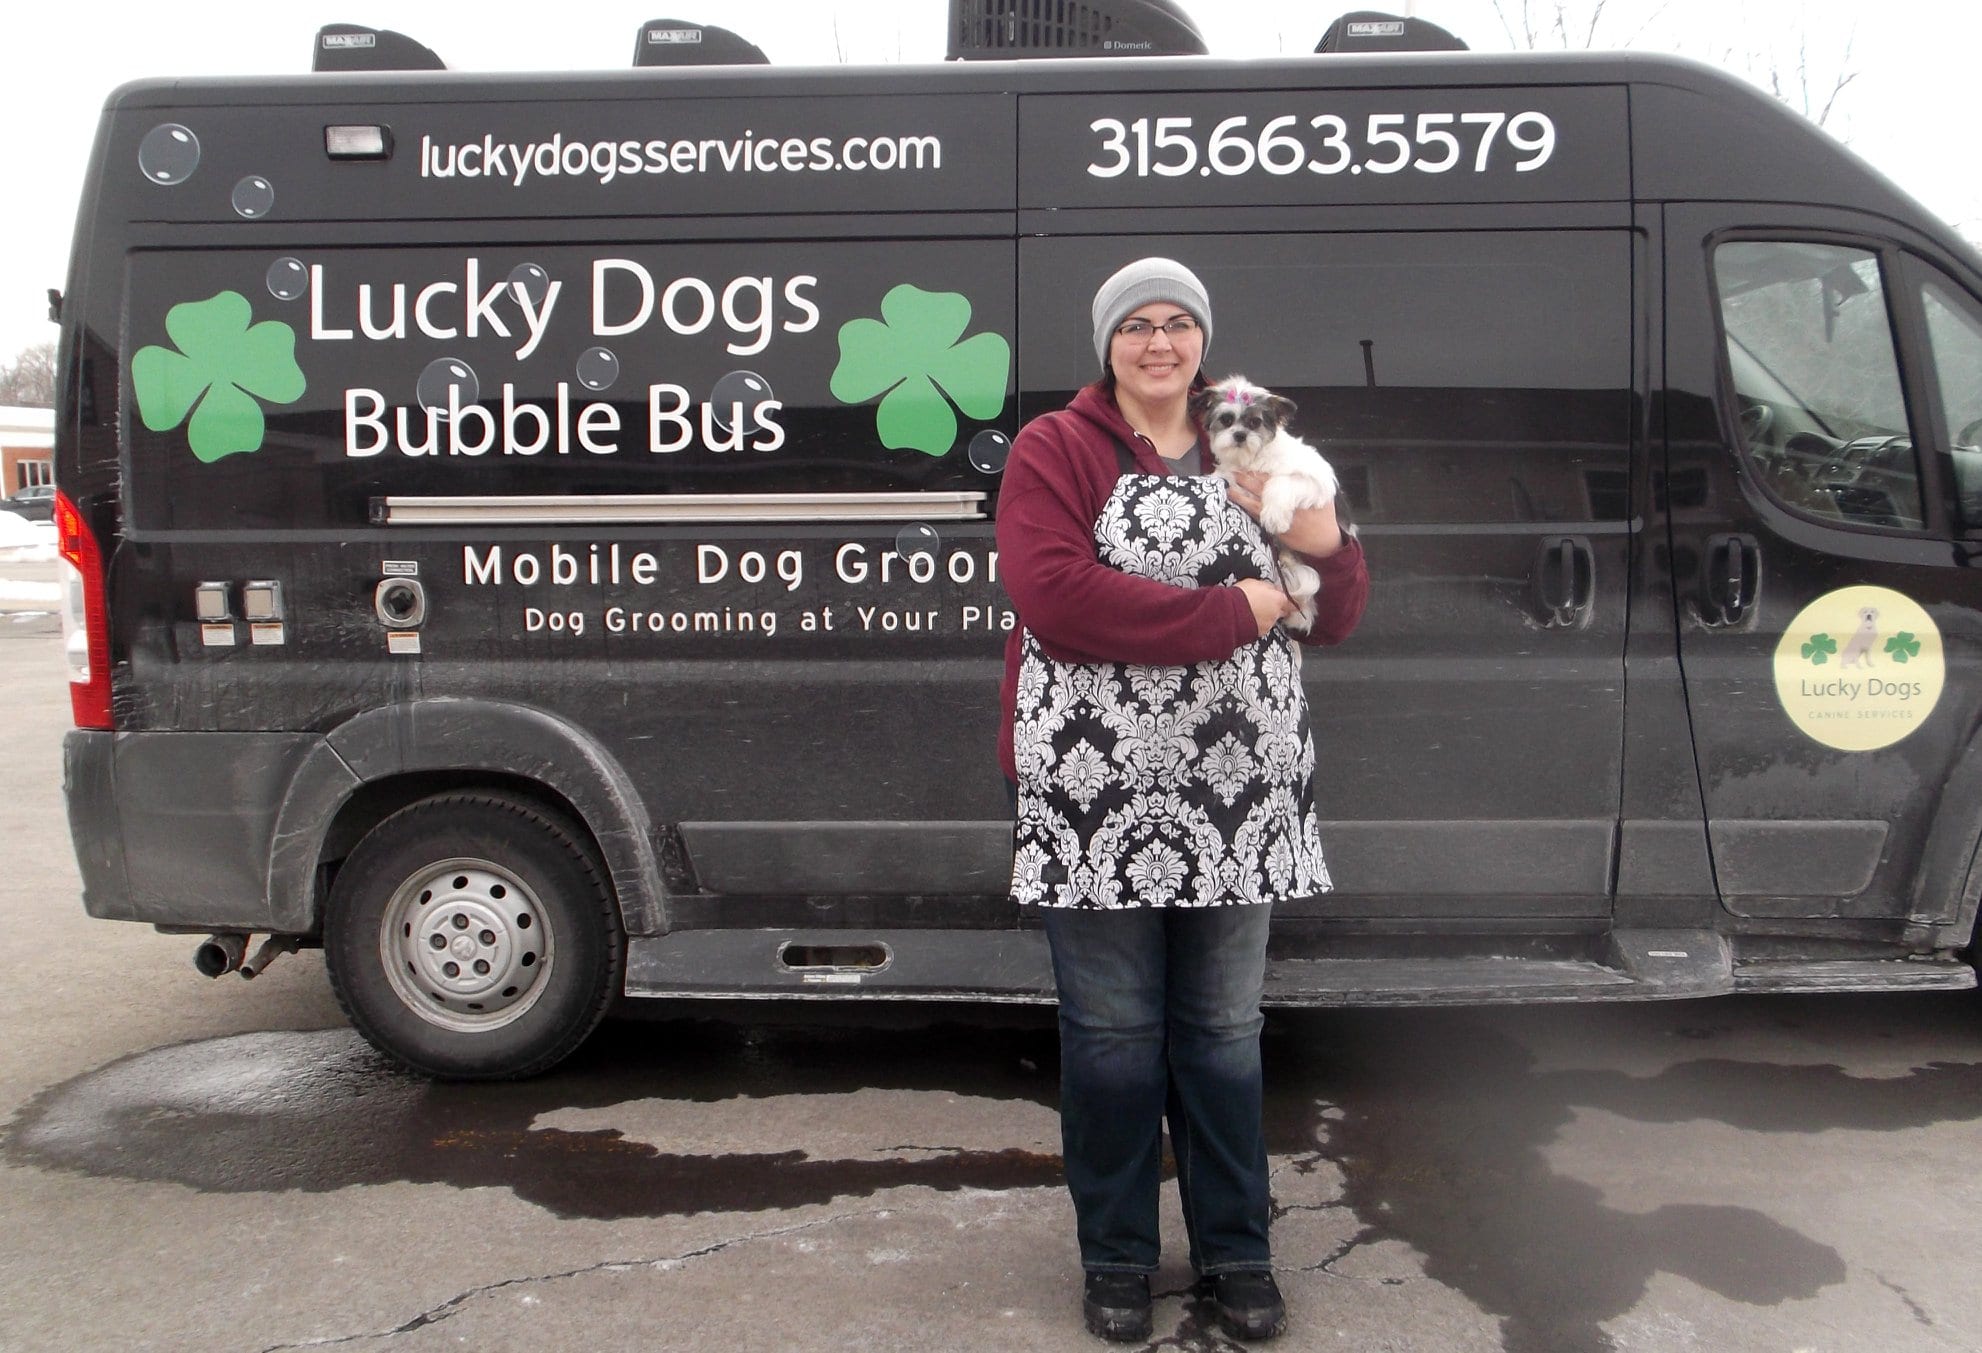 Lucky Dogs Bubble Bus mobile dog groomer in action